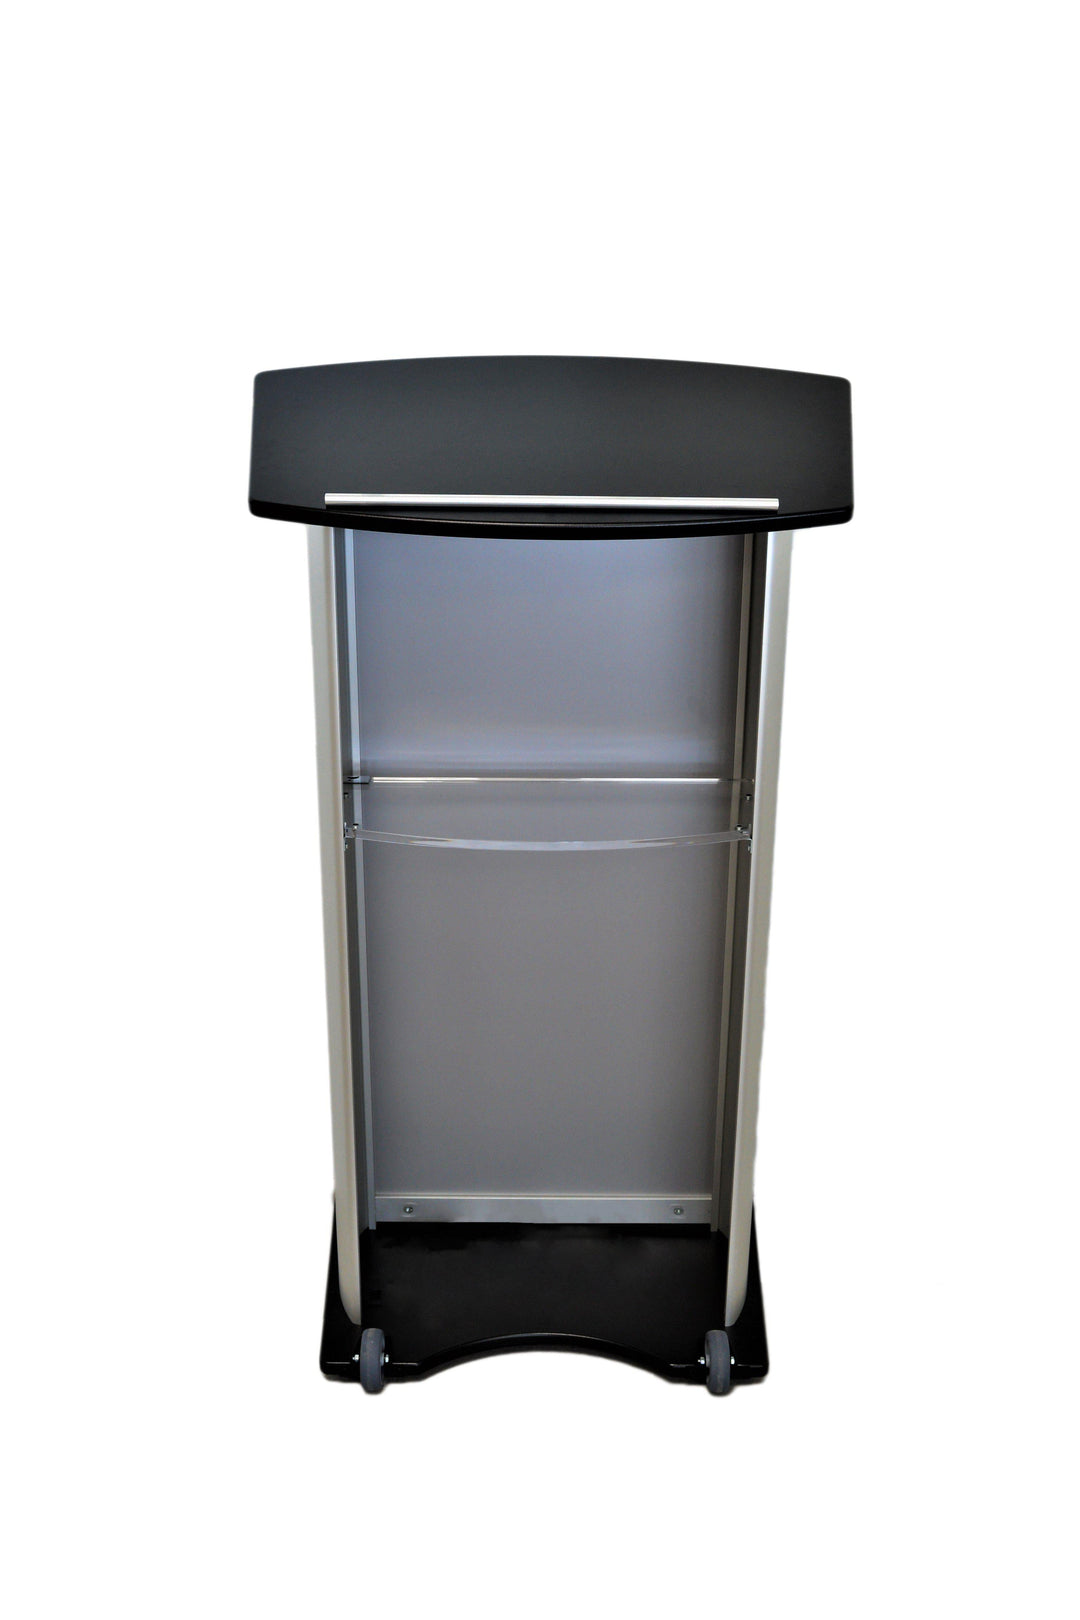 Contemporary Lectern and Podium H2 Standard Aluminum Lectern-Back Black Top and Base-Contemporary Lecterns and Podiums-Podiums Direct